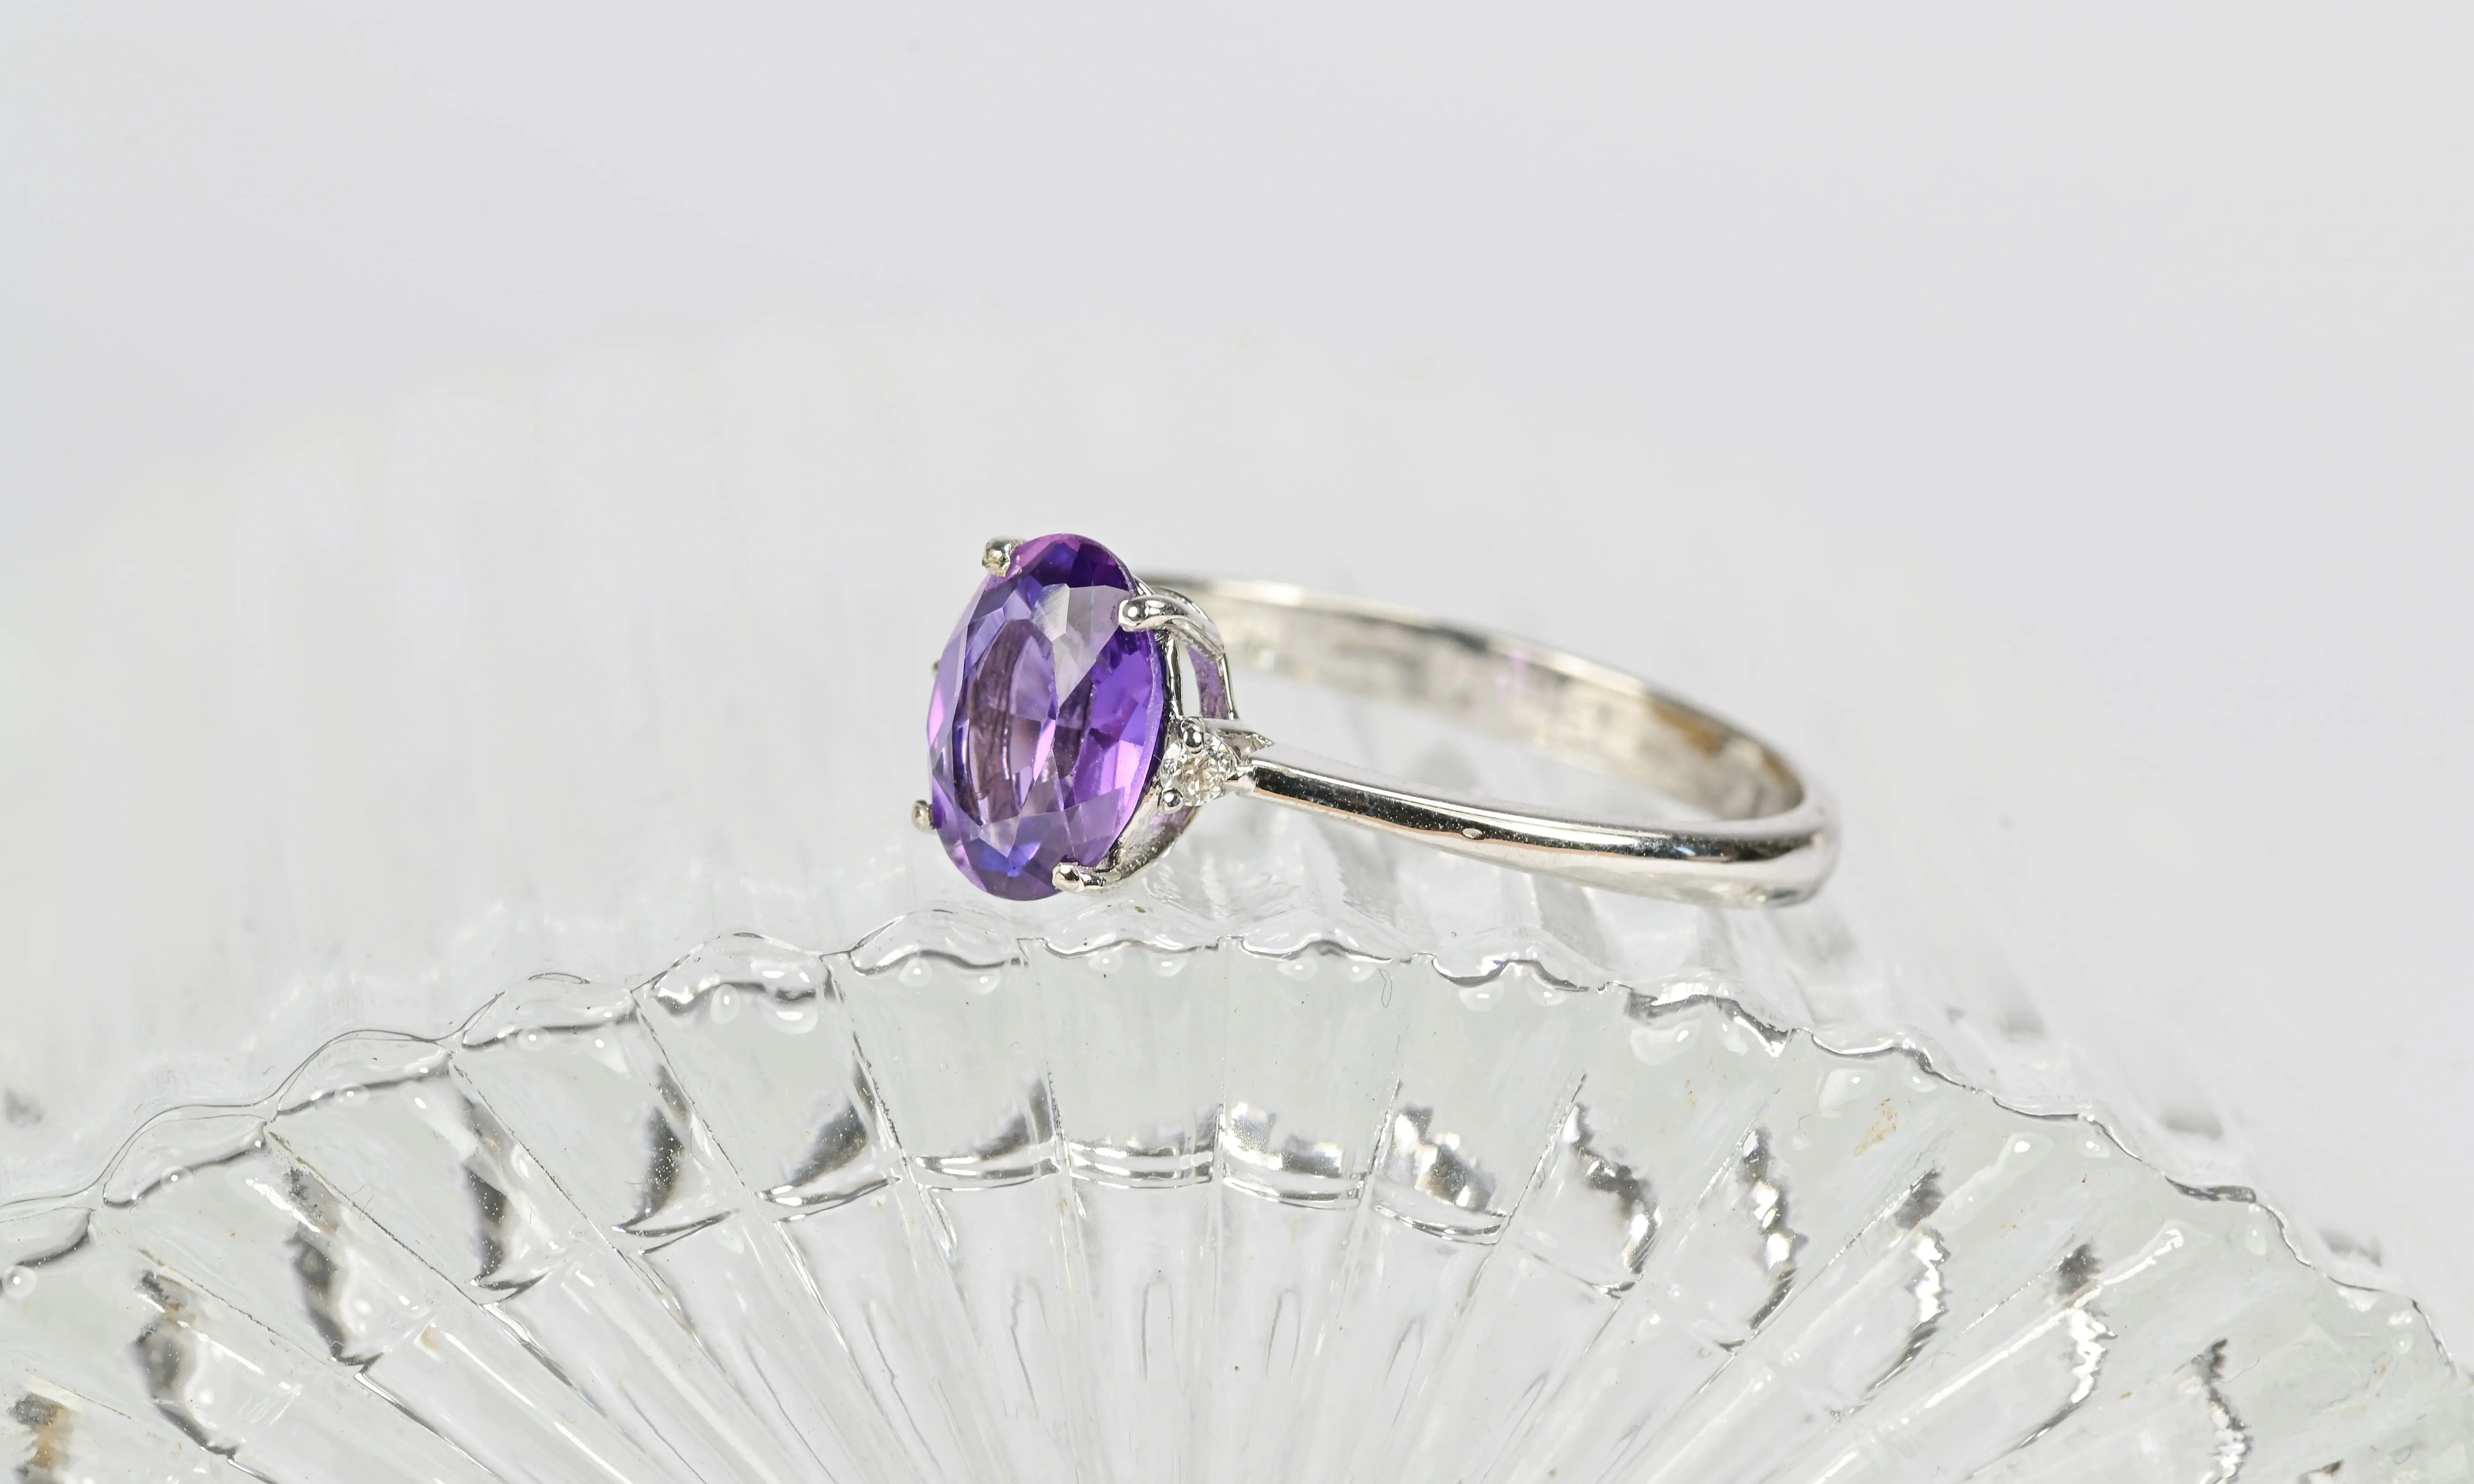 Vintage ring featuring a central amethyst and encircled by diamonds